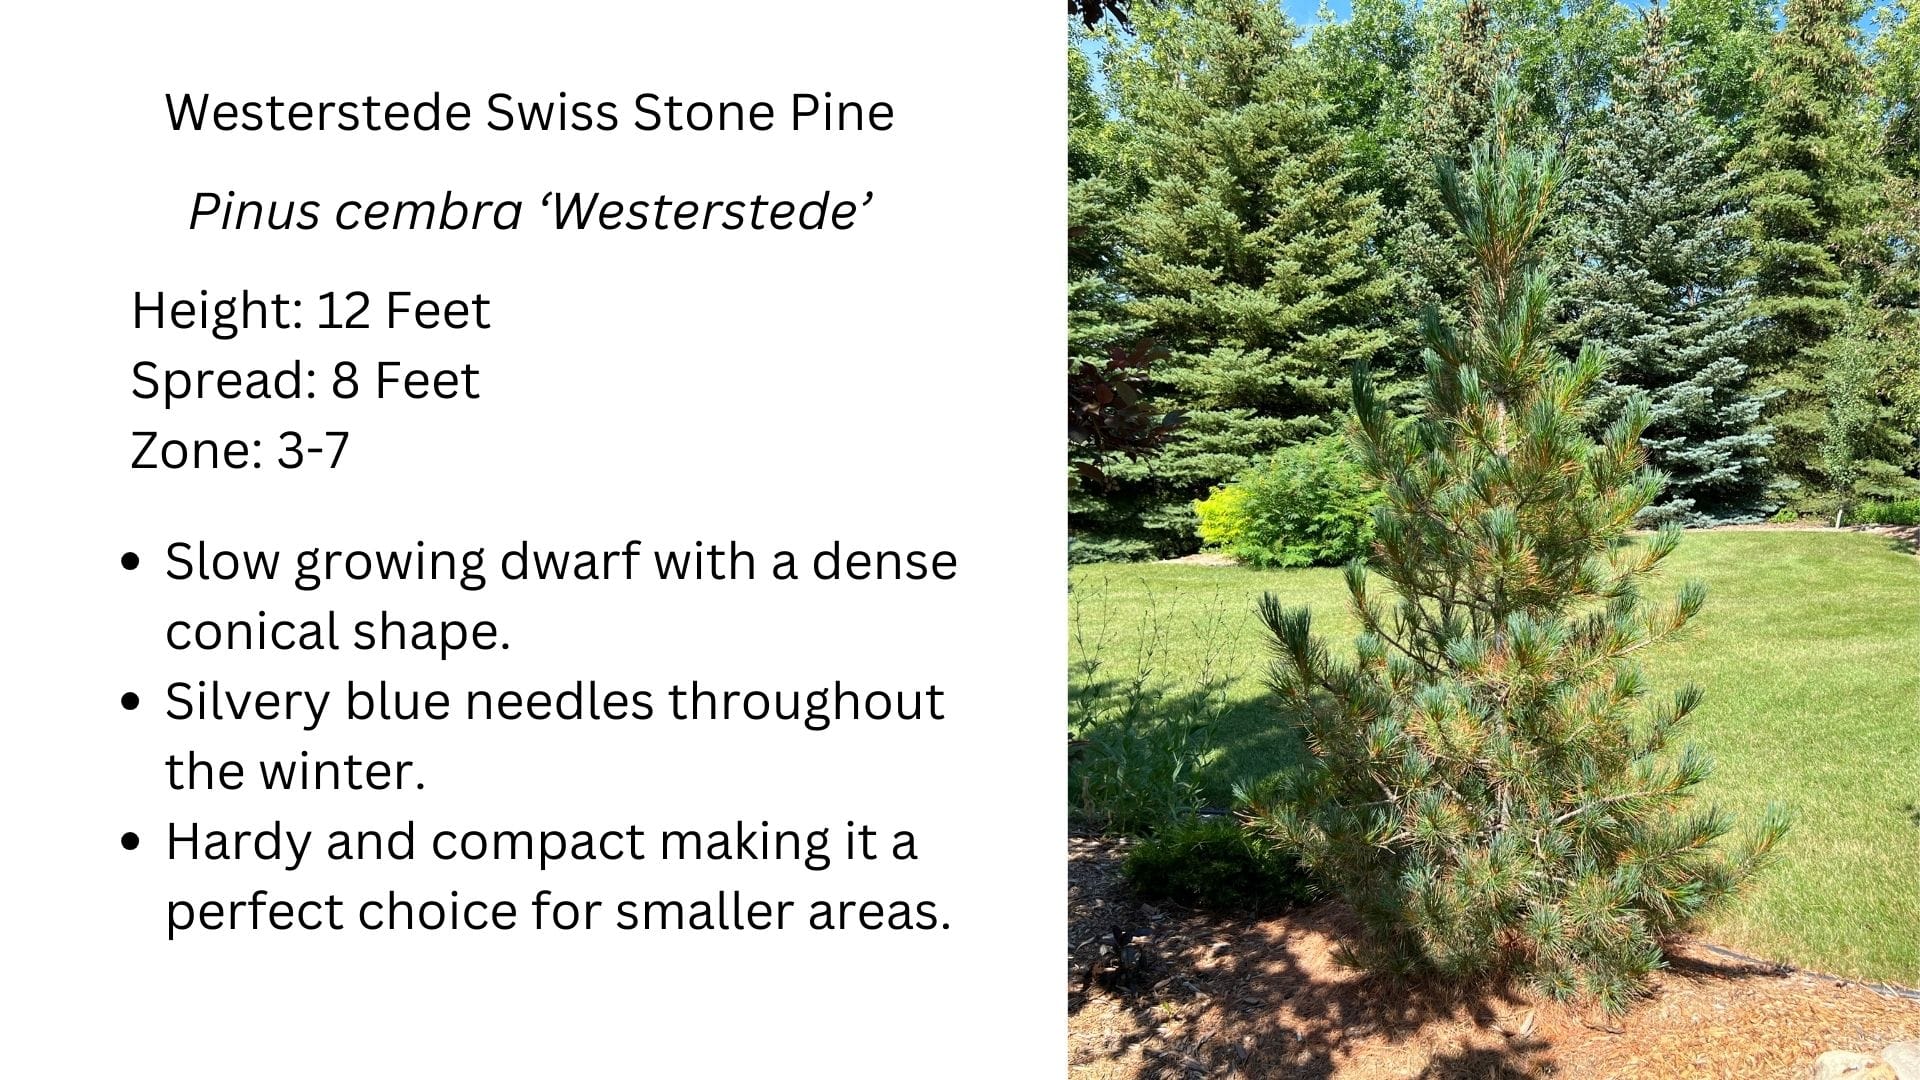 Westerstede Swiss Stone Pine, Pinus cembra 'Westerstede'